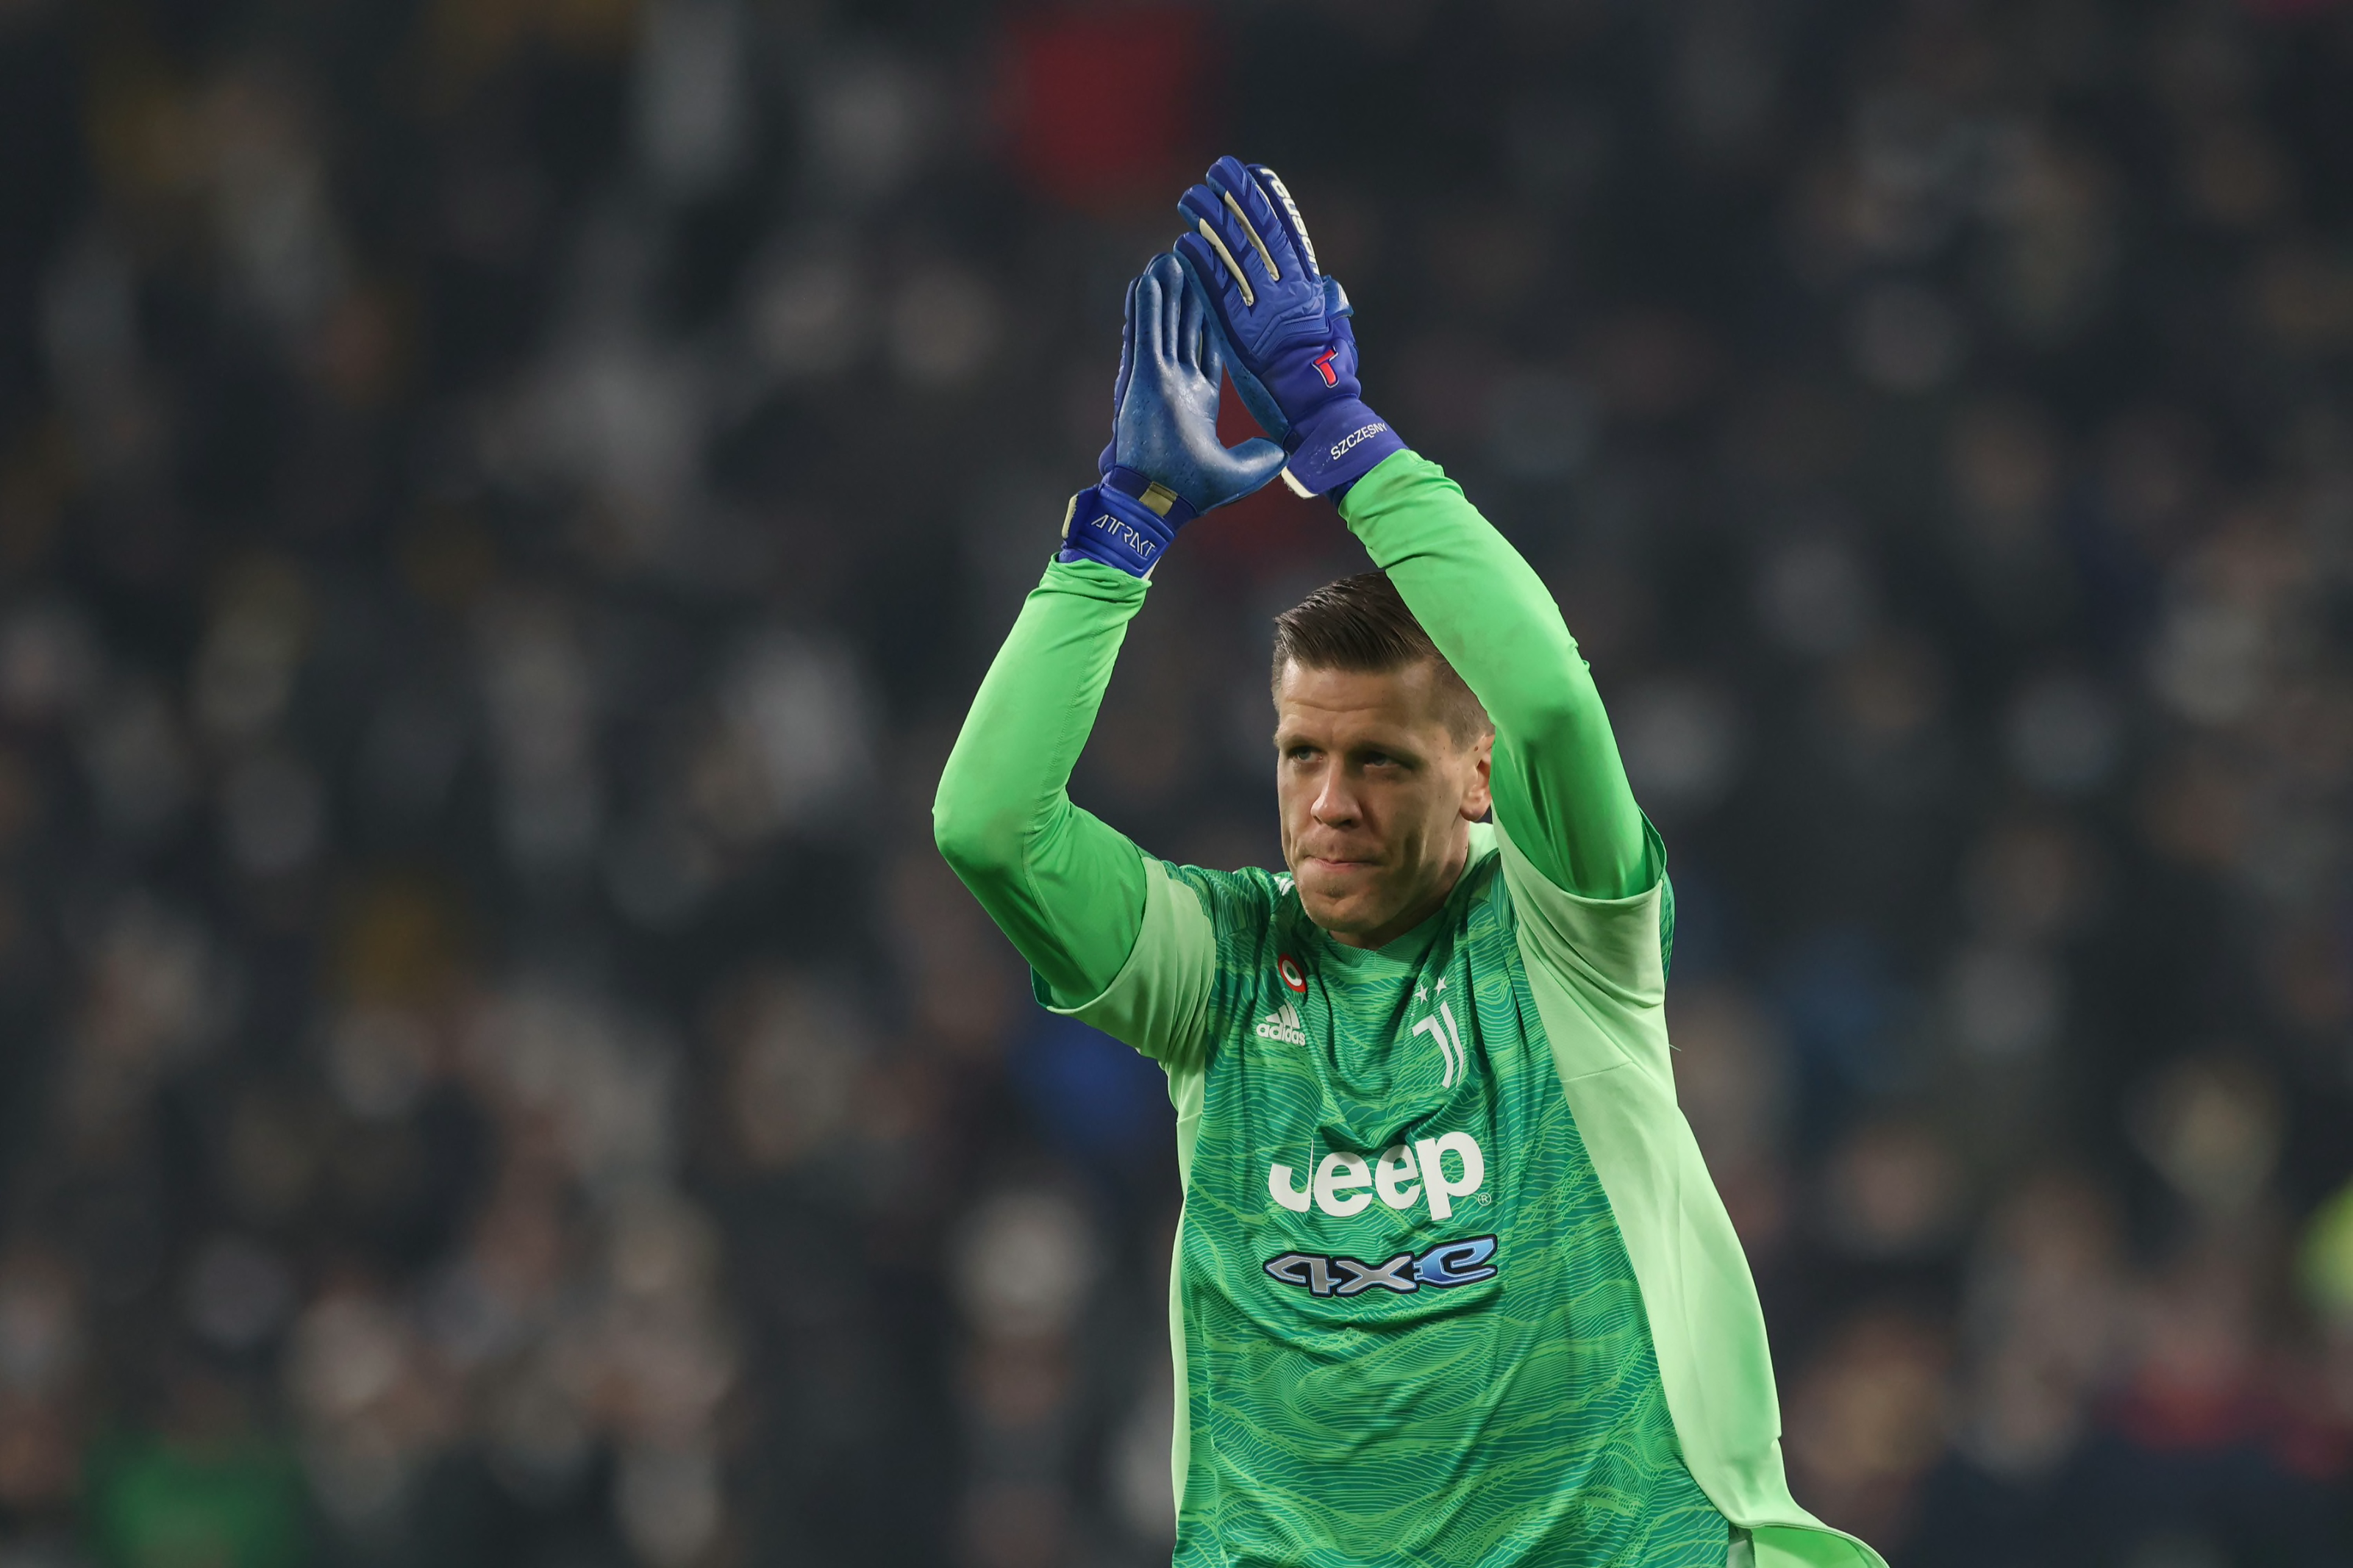 Juventus 2-0 Cagliari: Player Ratings as Juve End 2021 With a Win